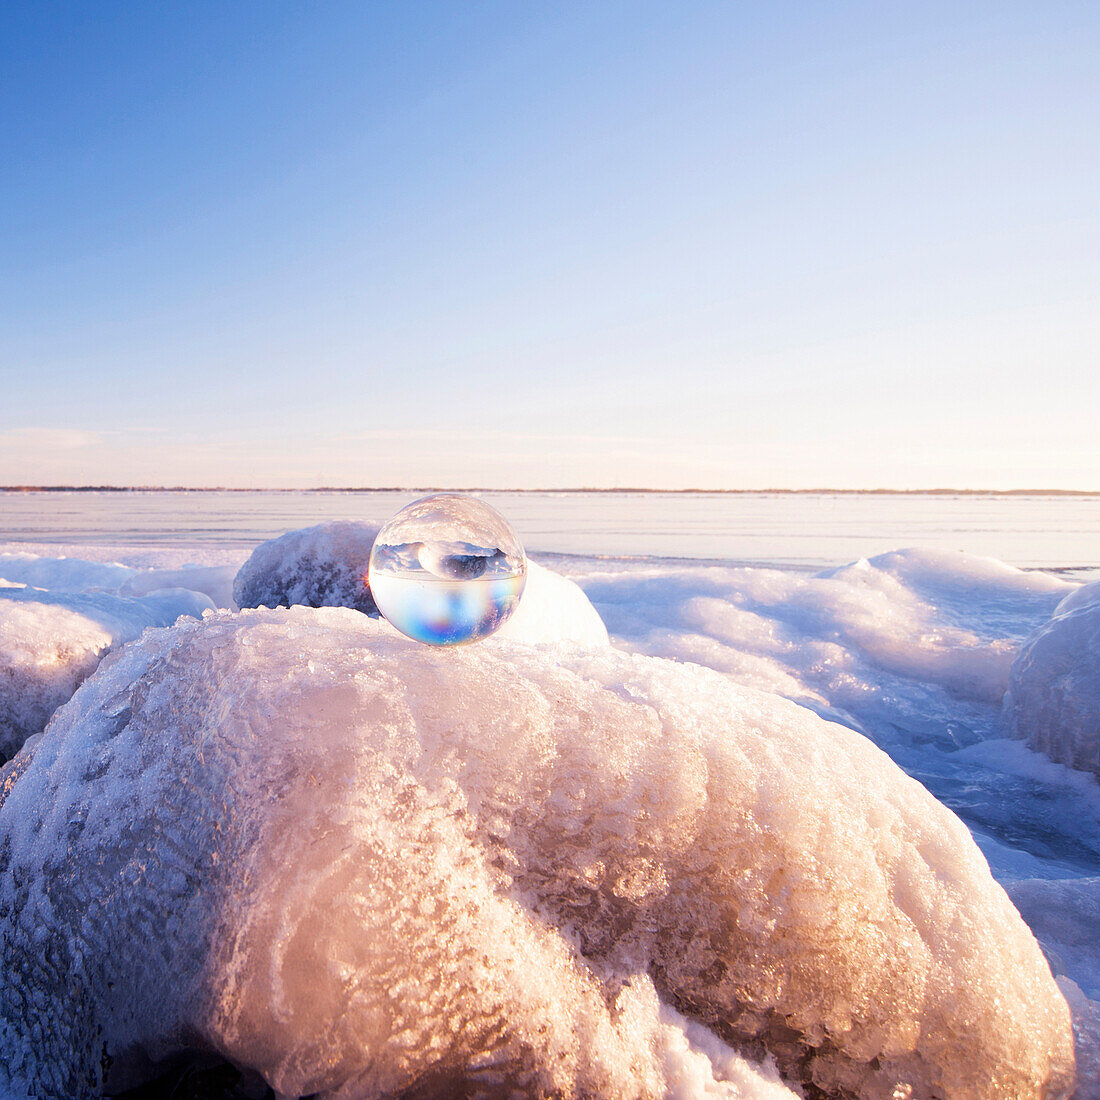 Glass sphere on frozen rock formations, kingston, ontario, canada